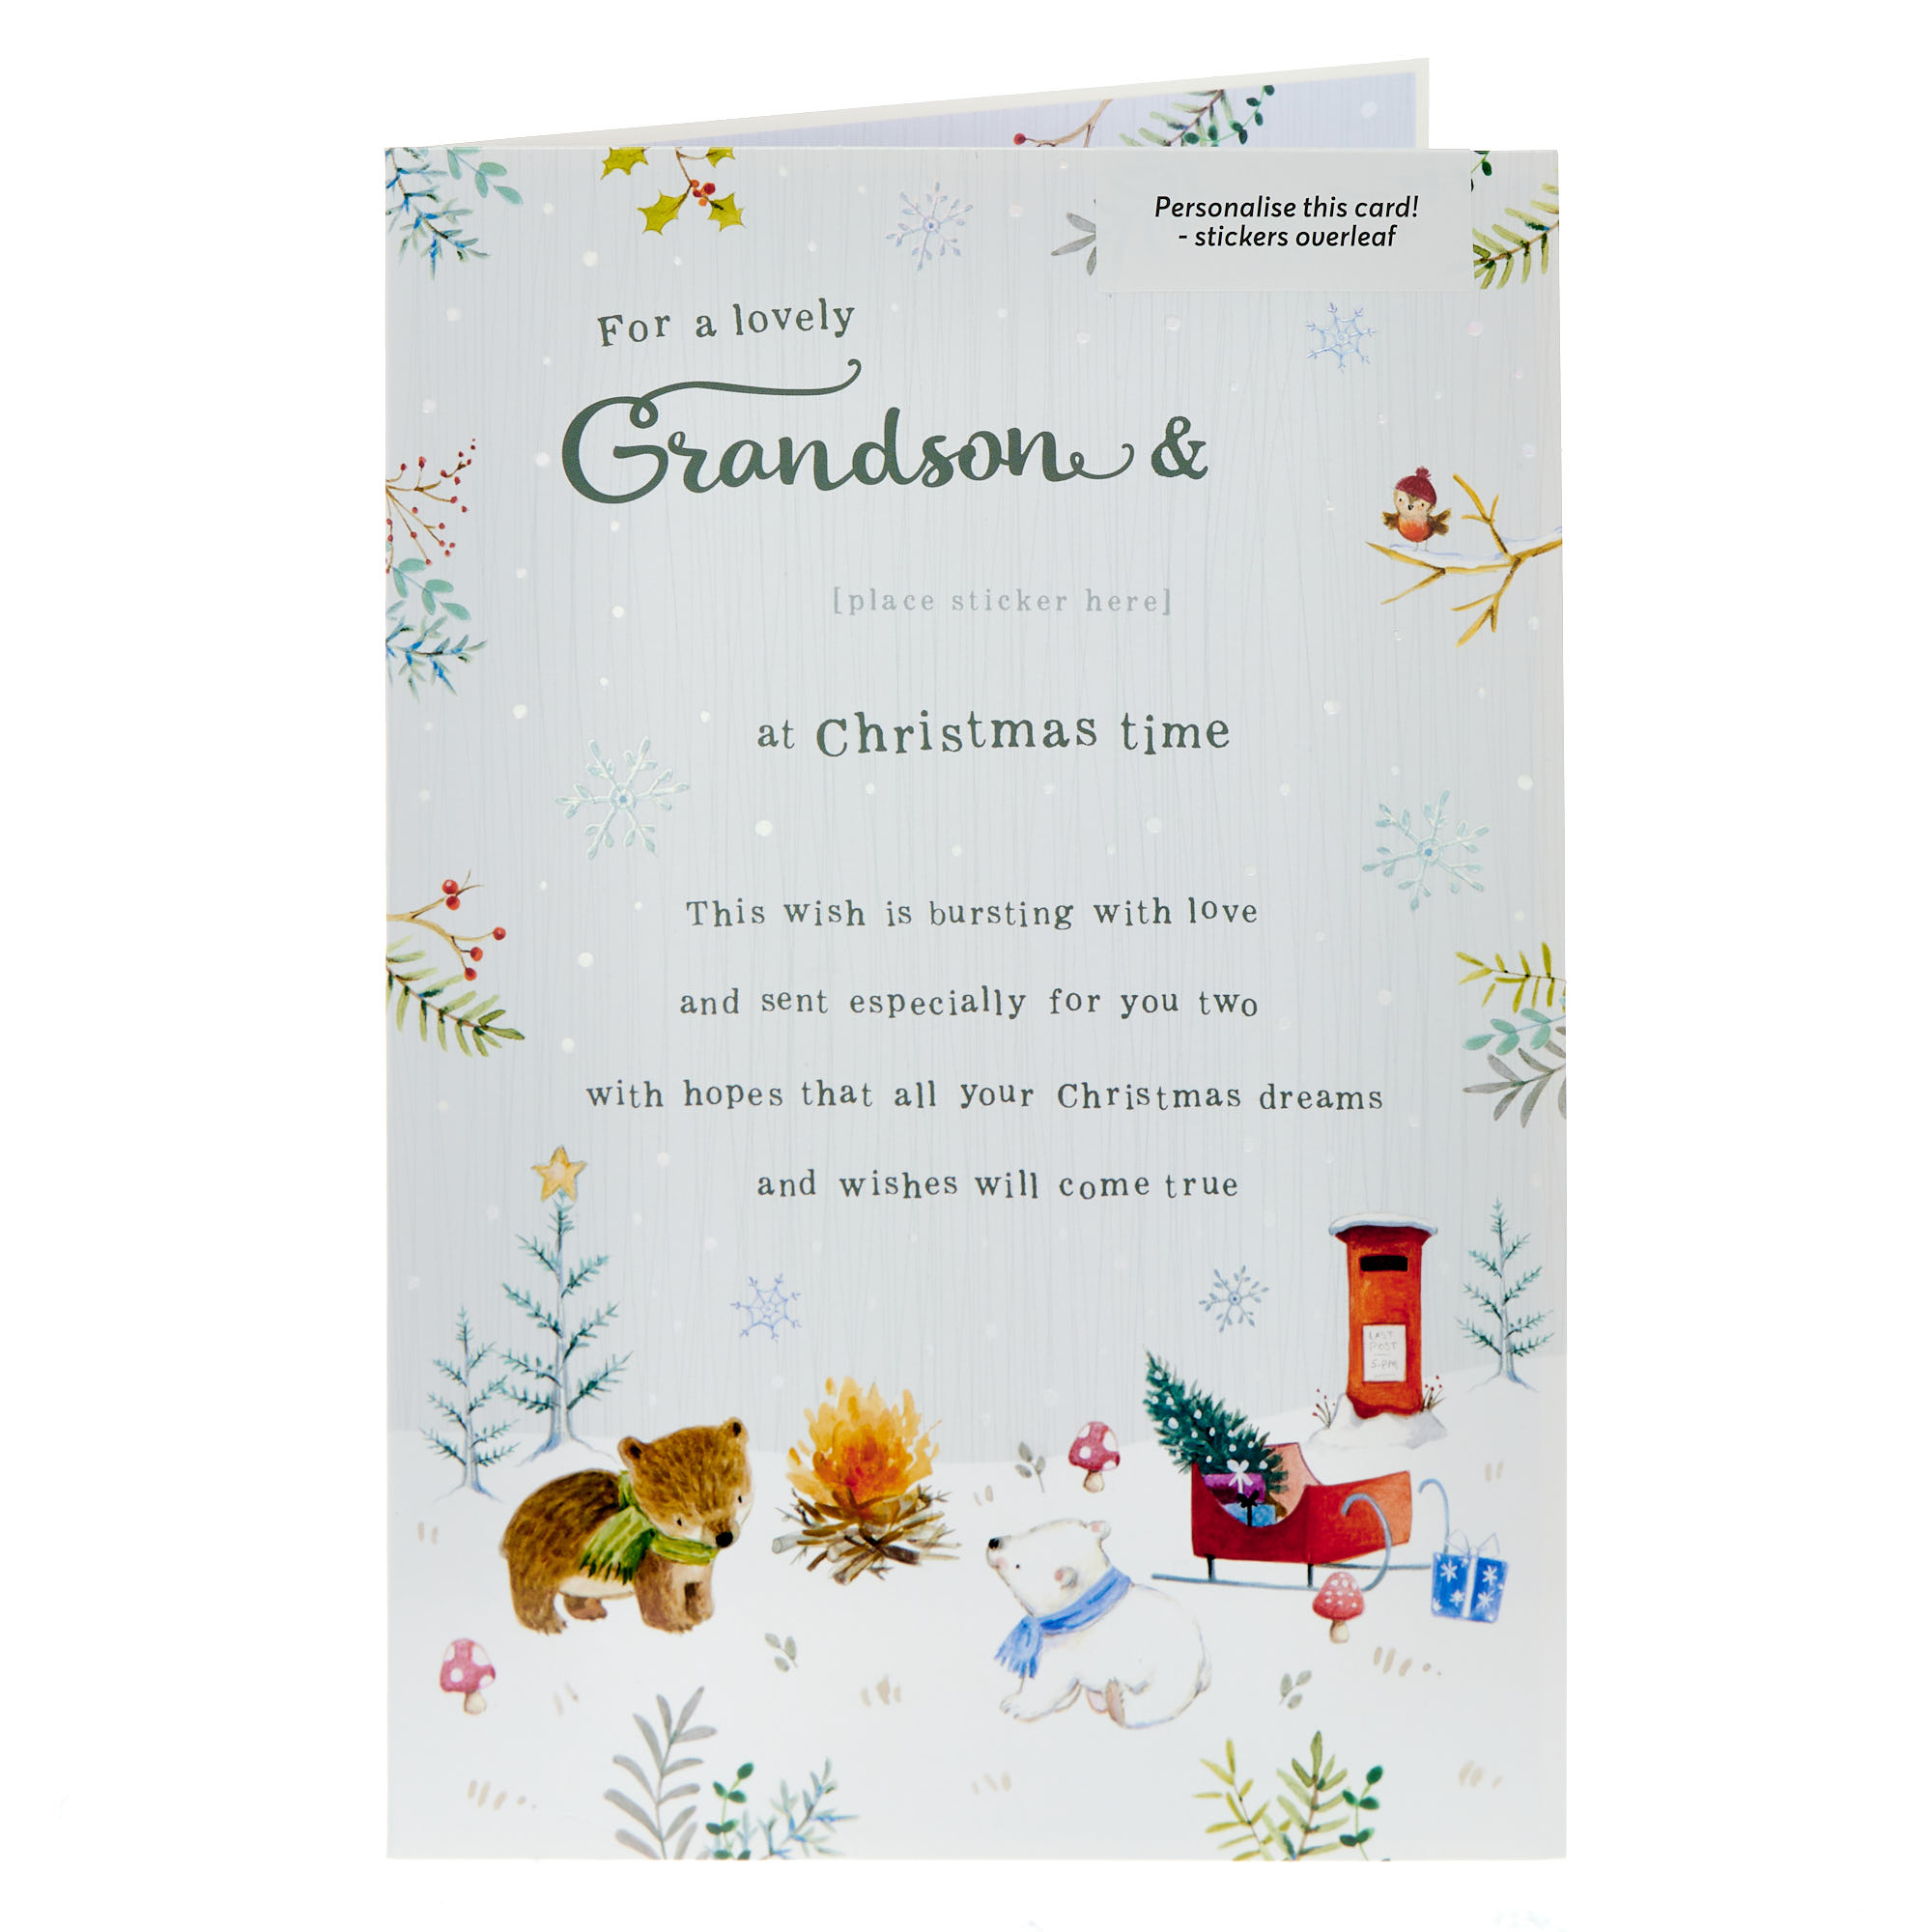 Grandson & Partner Verse & Animals Christmas Card (With Stickers)